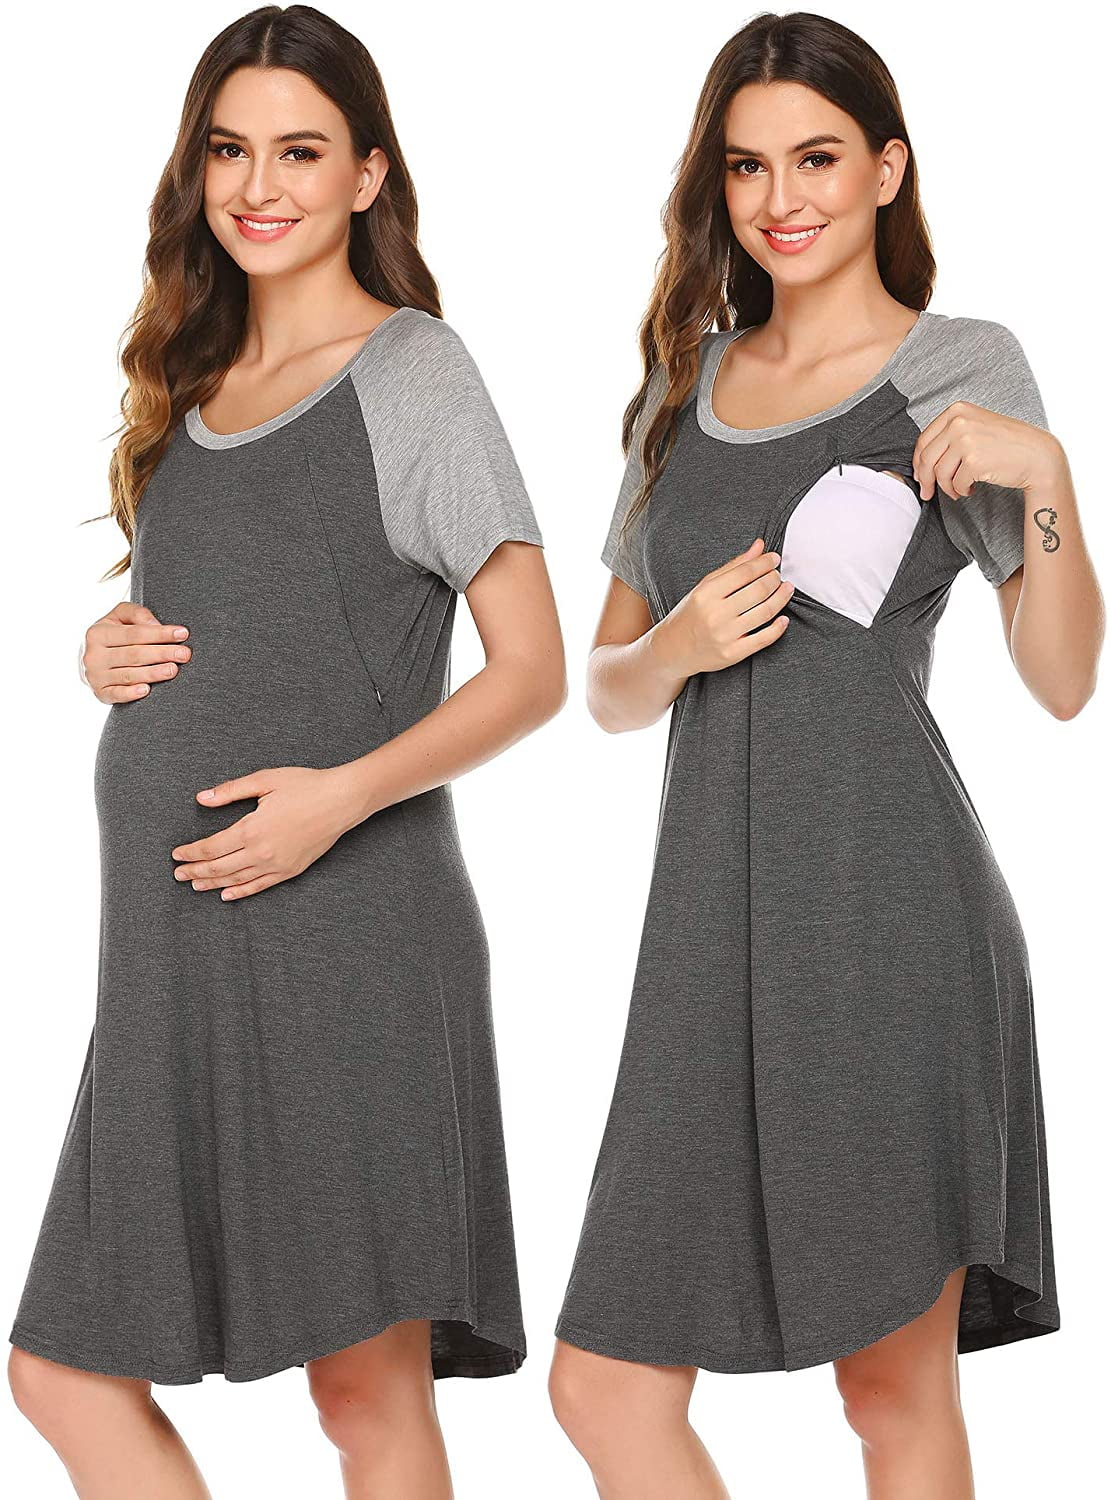 Ekouaer 3 in 1 Nursing Nightgowns V Neck Maternity Hospital Gown for Breastfeeding Delivery Labor Robe Classic Style